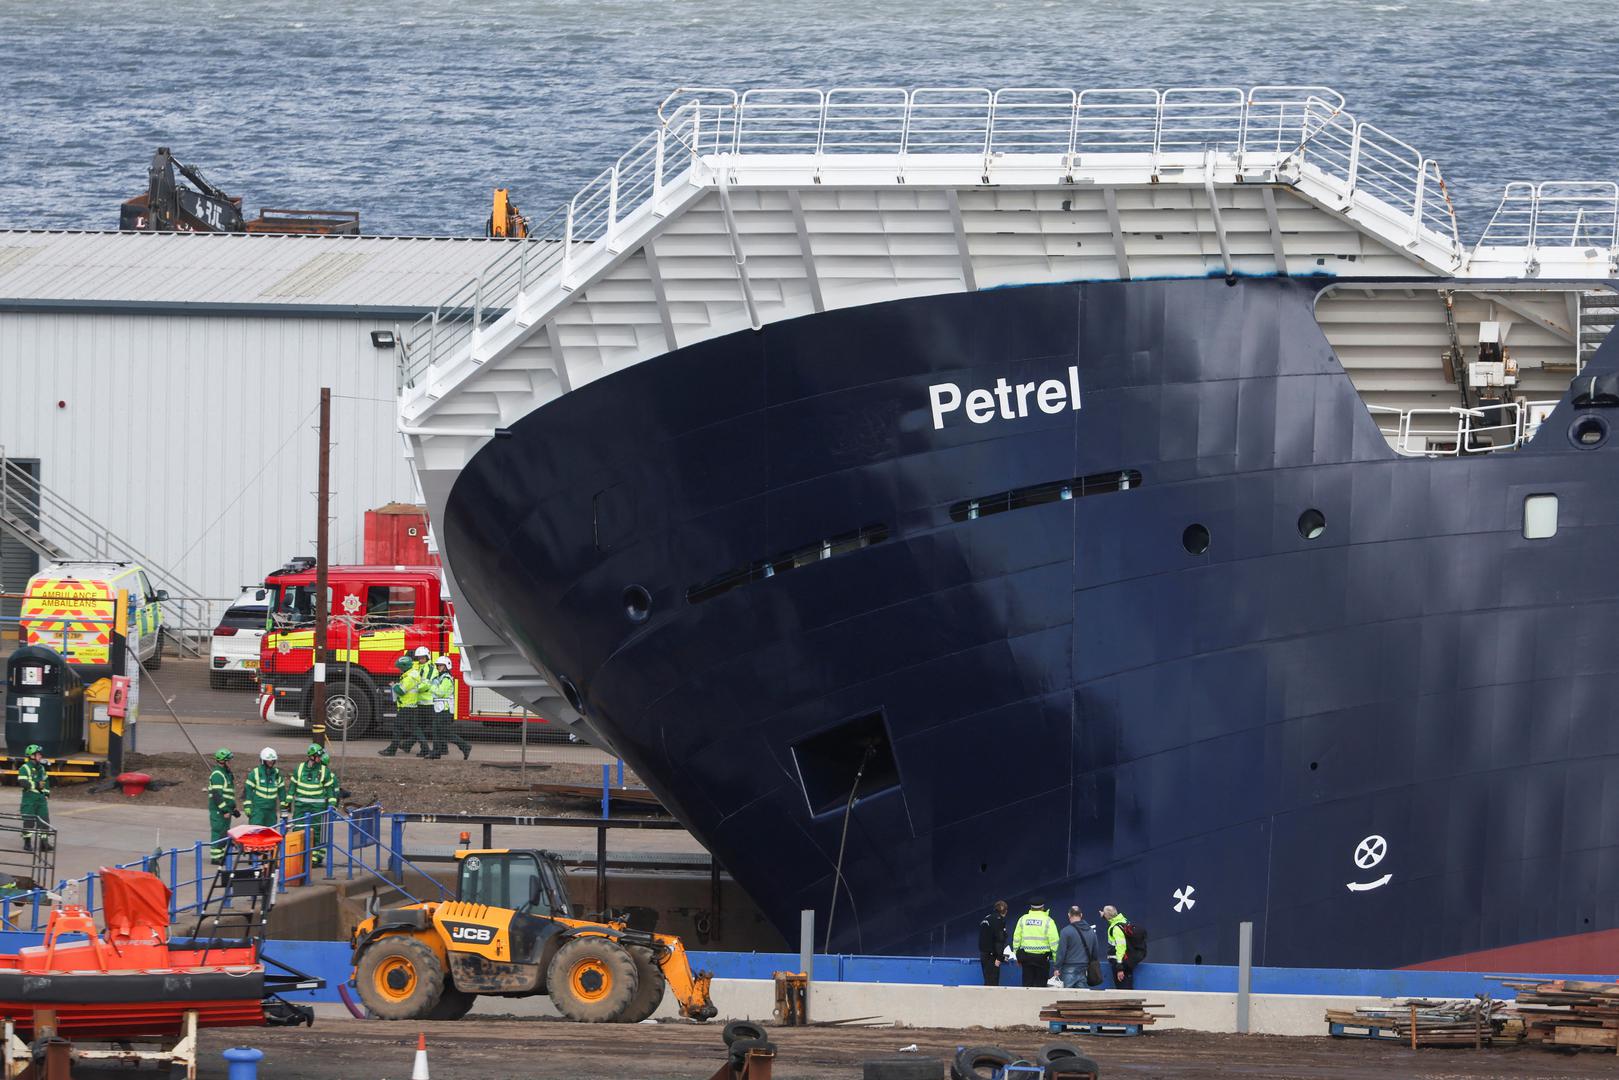 View of the research vessel Petrel after it toppled over in a dry dock in Leith, near Edinburgh, Scotland, Britain, March 22, 2023. REUTERS/Russell Cheyne Photo: RUSSELL CHEYNE/REUTERS